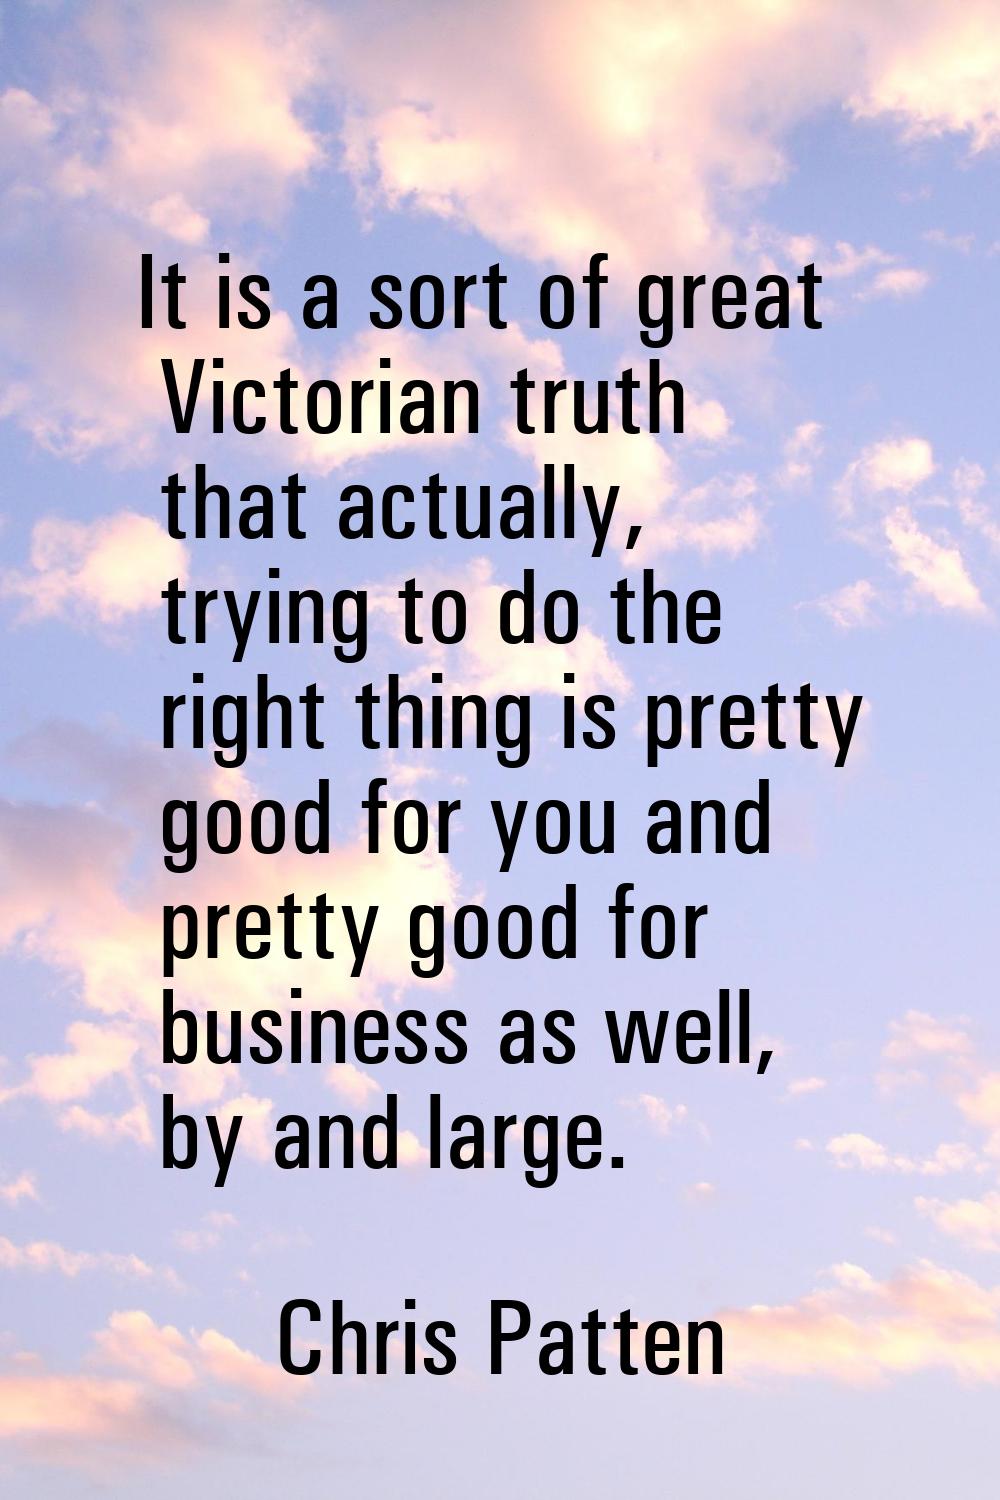 It is a sort of great Victorian truth that actually, trying to do the right thing is pretty good fo